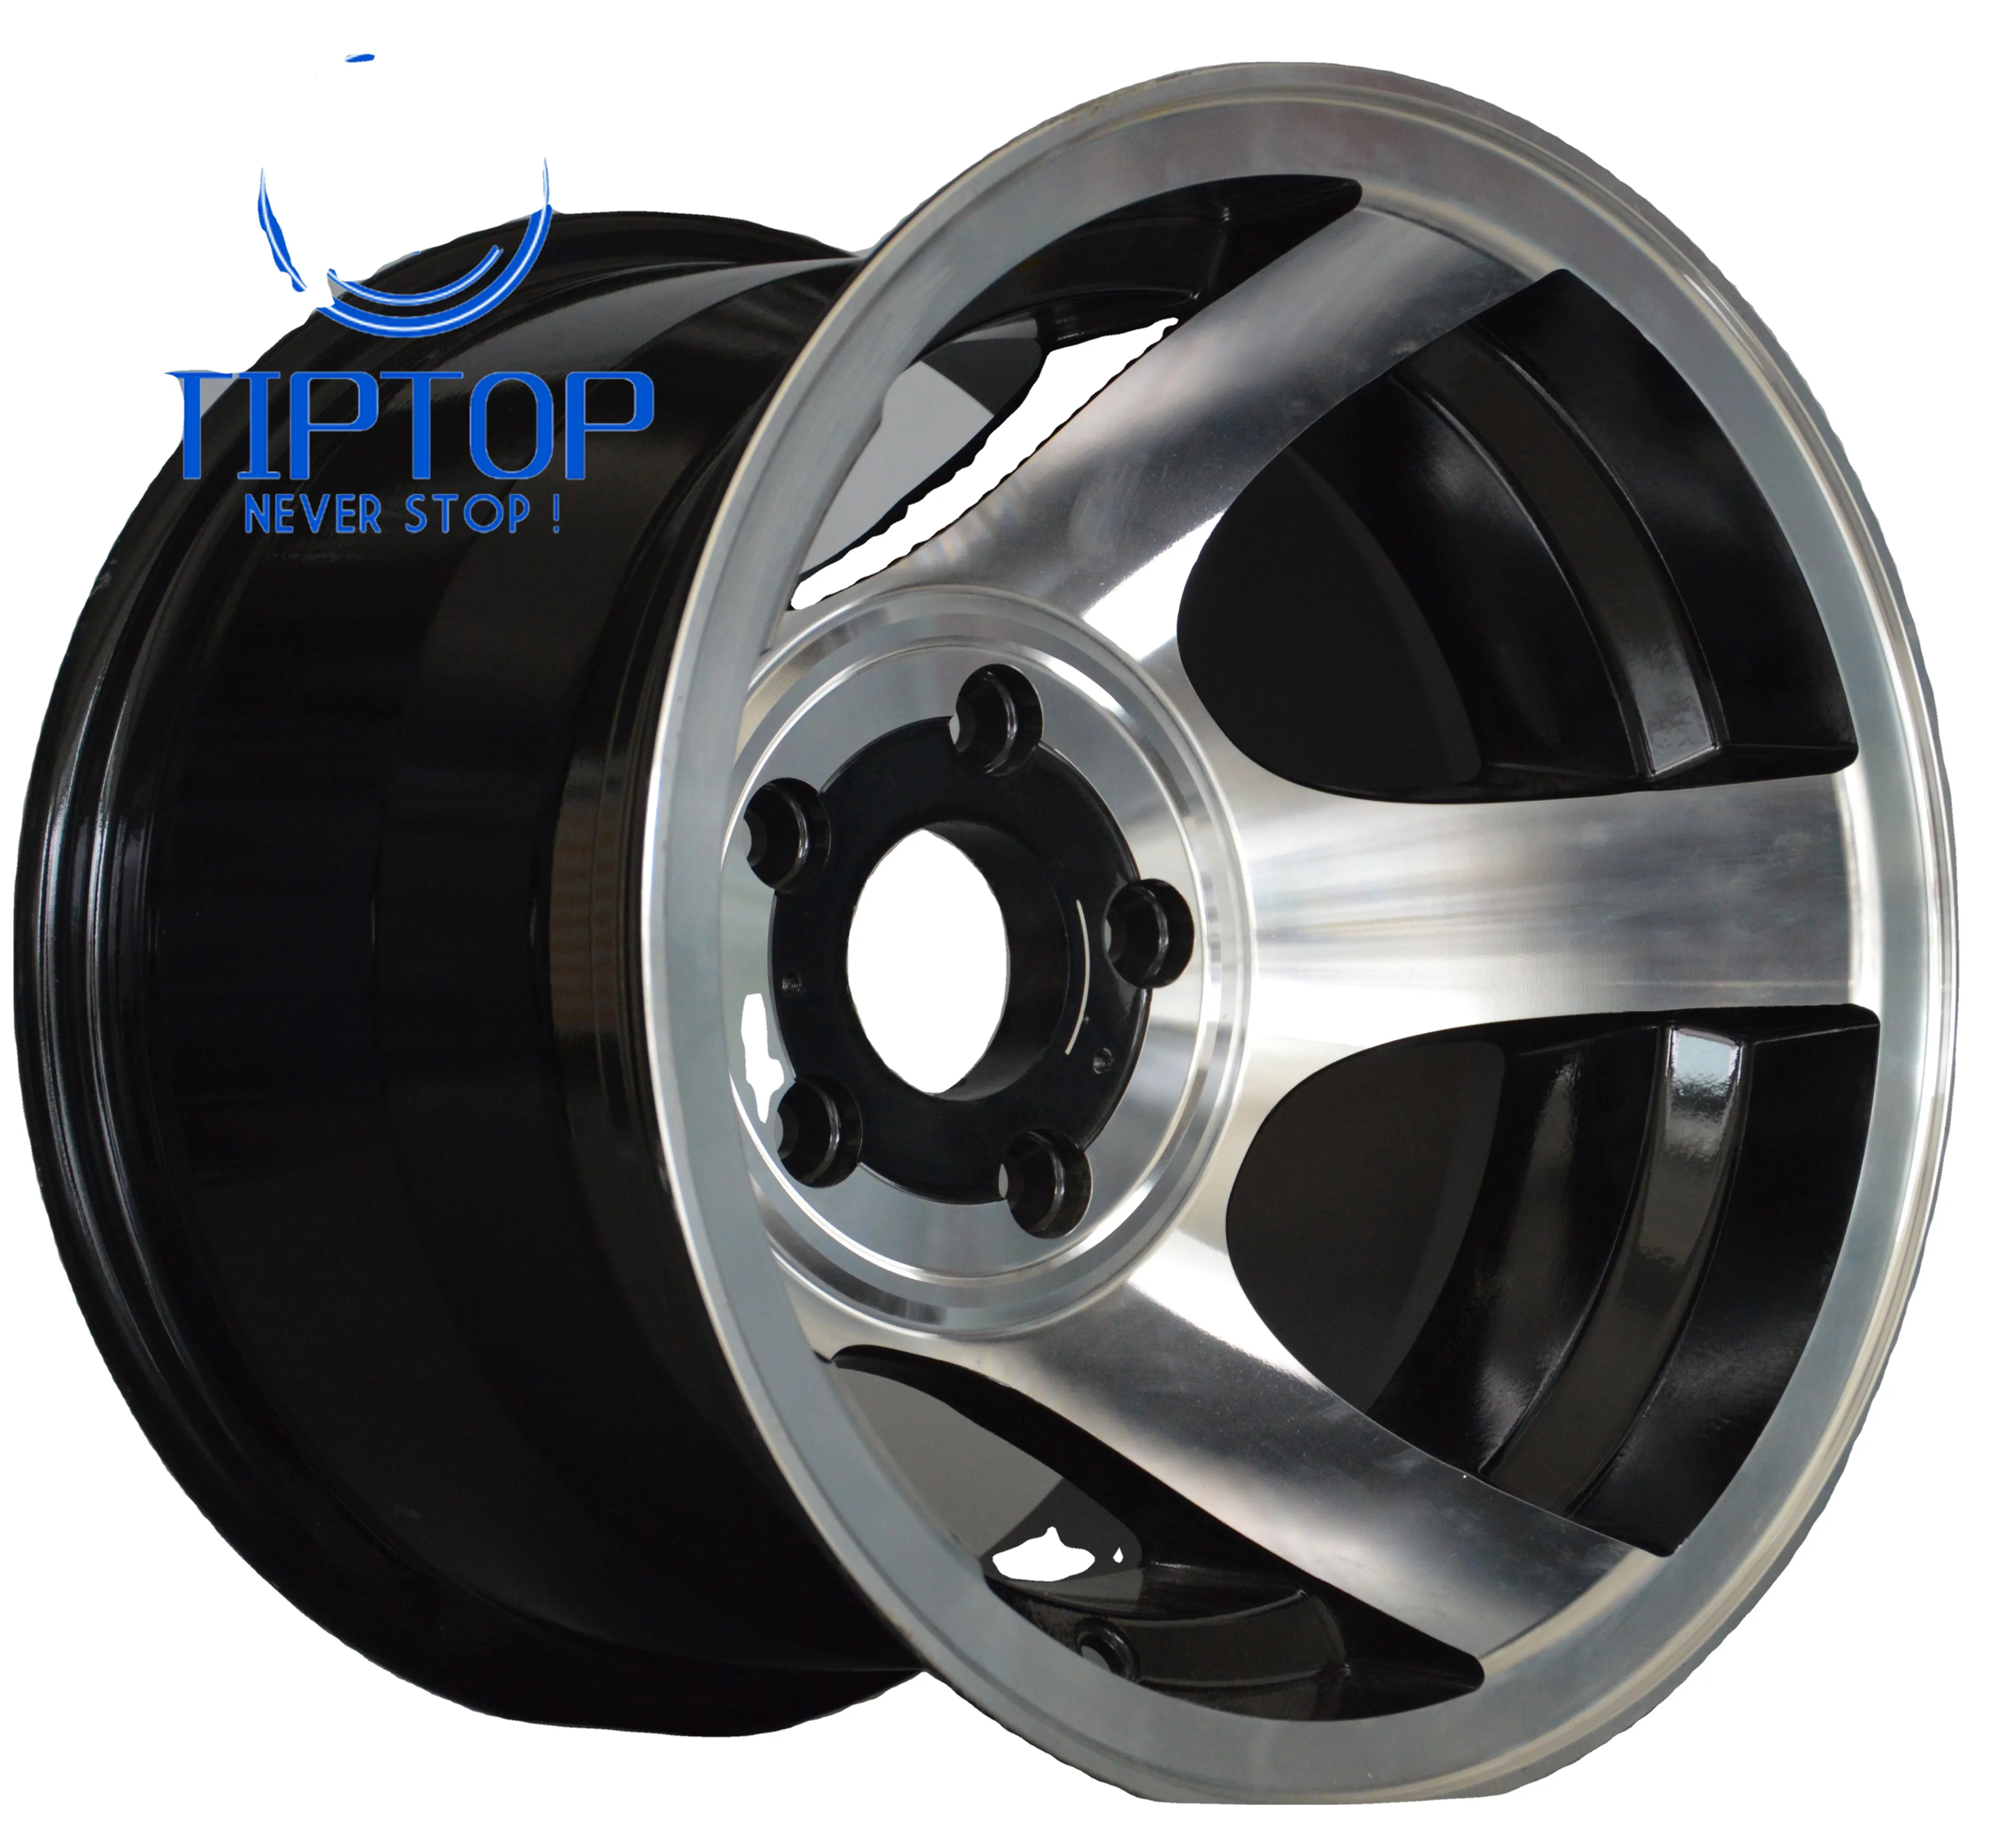 Alloy wheels 15x10 inch with PCD 5x139.7 fit for 4X4 ATV rims Auto parts ET-44mm in stock ready to ship